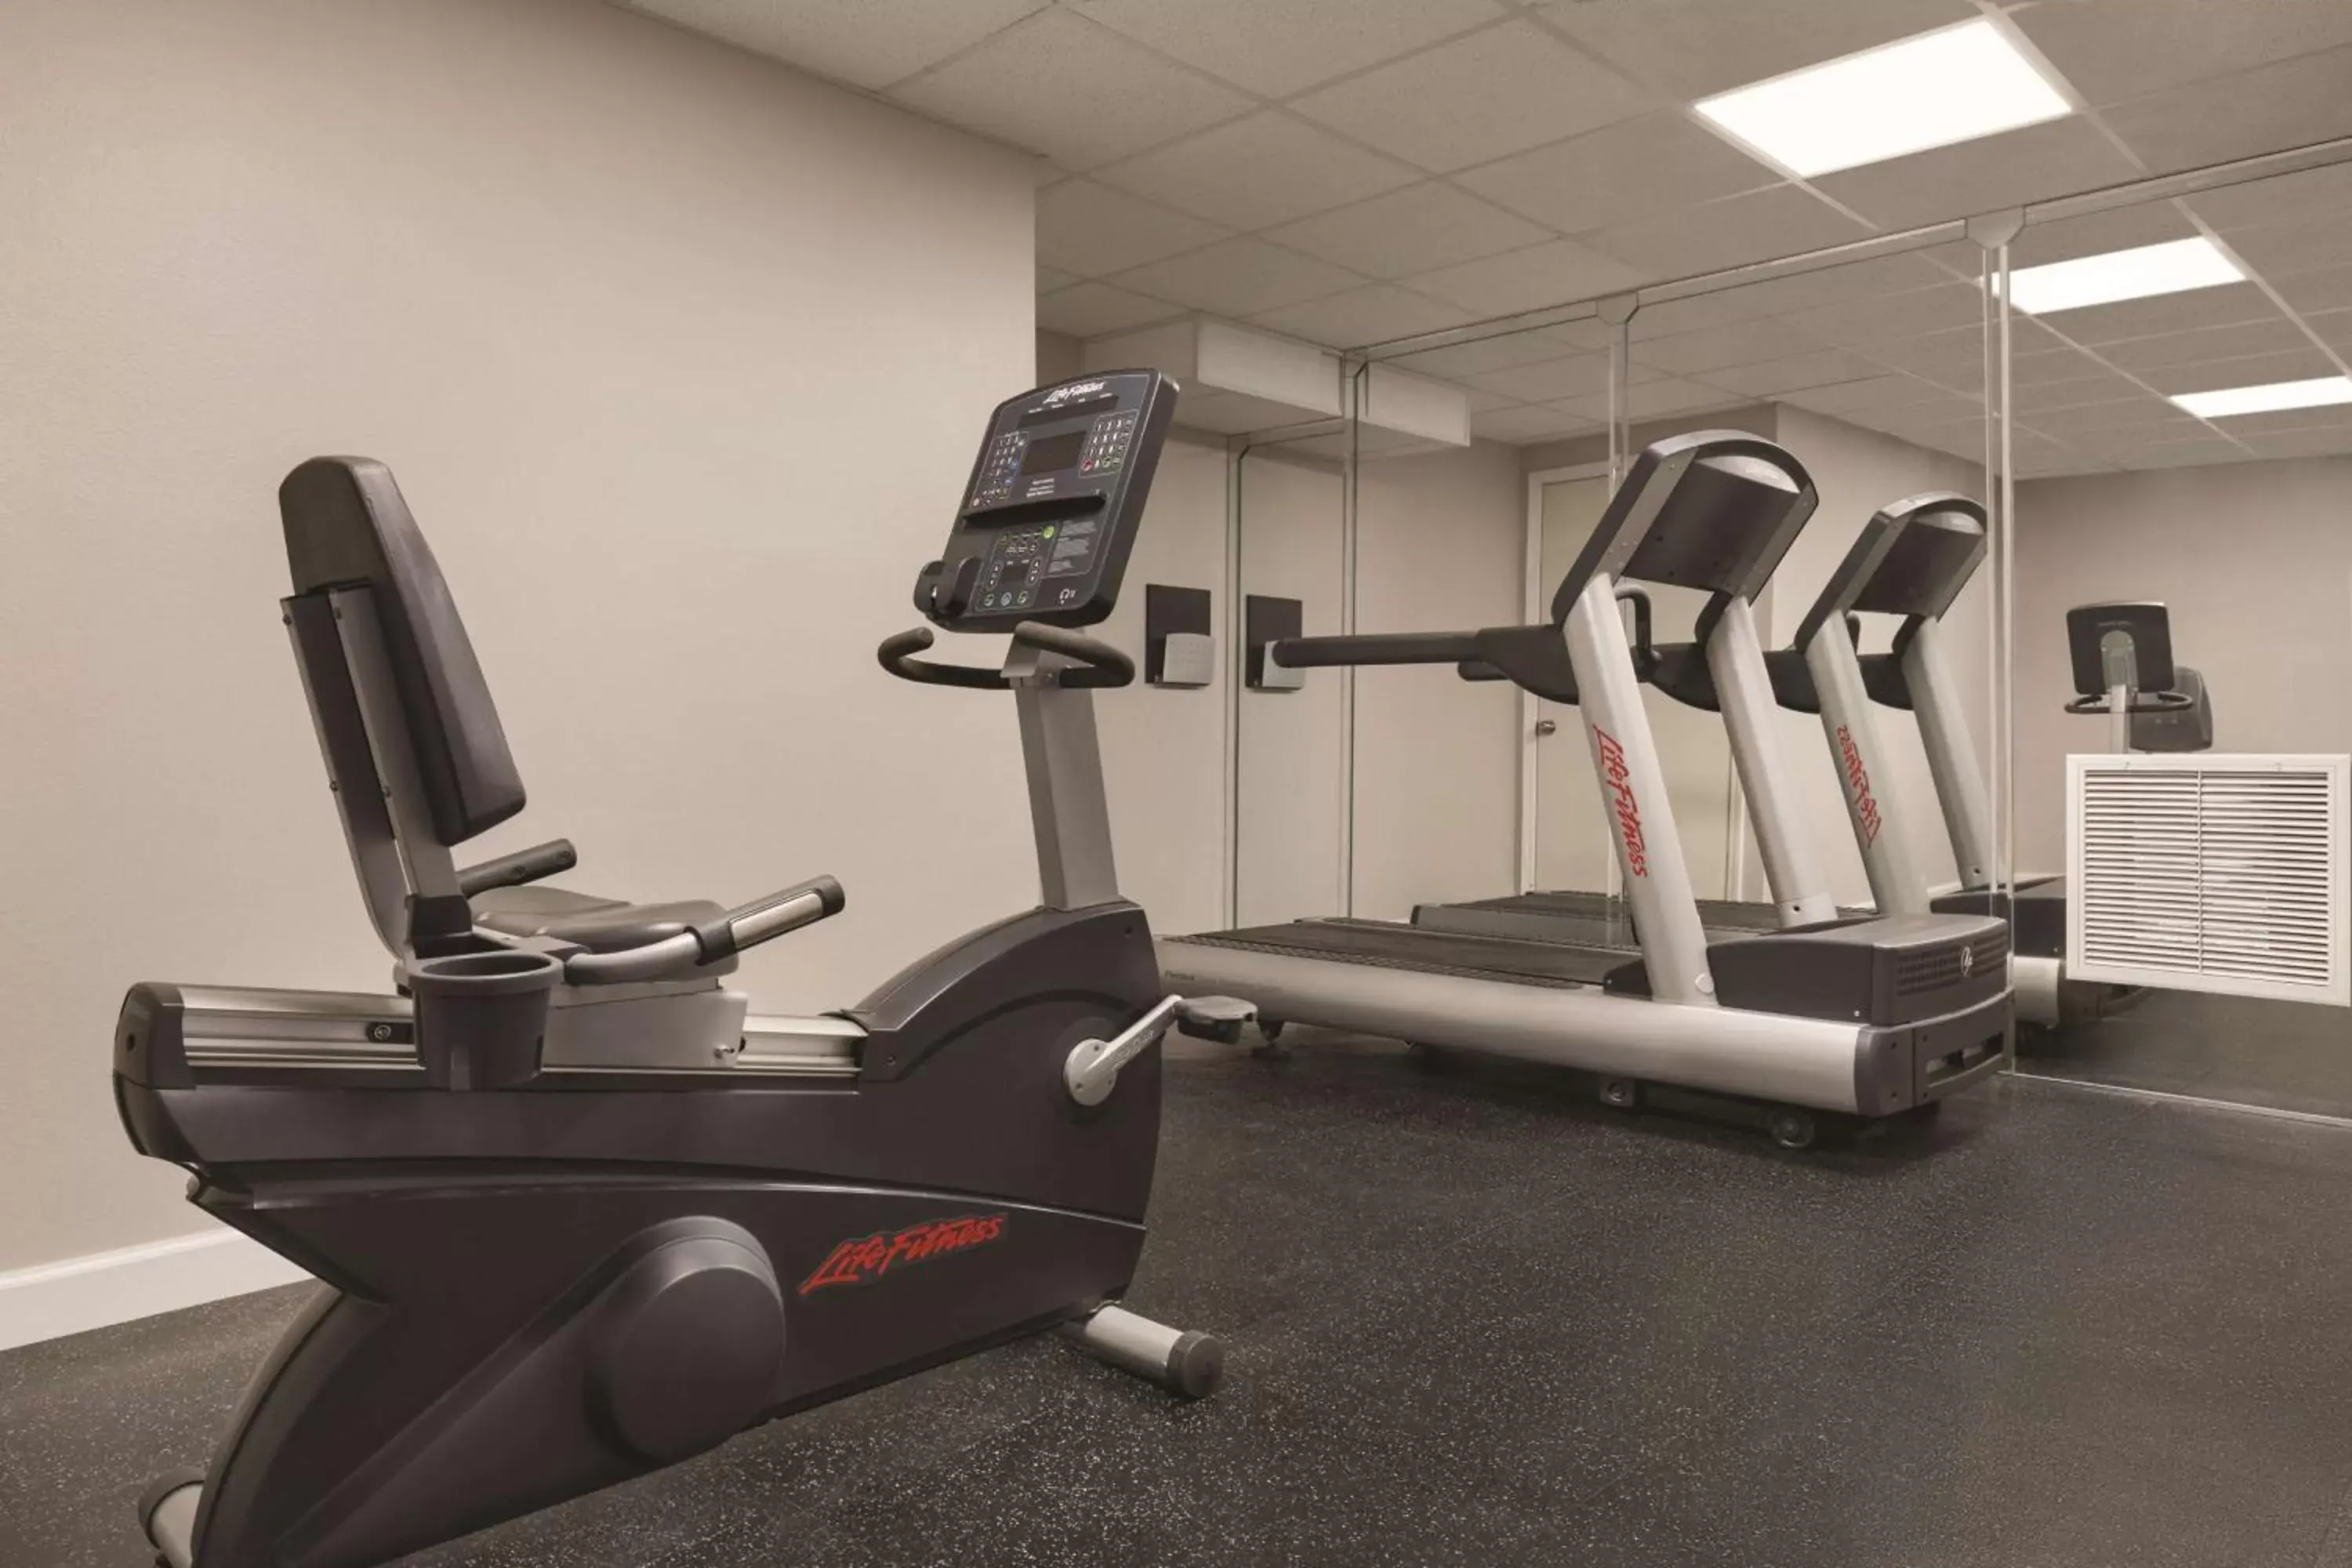 Fitness centre/facilities, Fitness Center/Facilities in Country Inn & Suites by Radisson, Panama City, FL